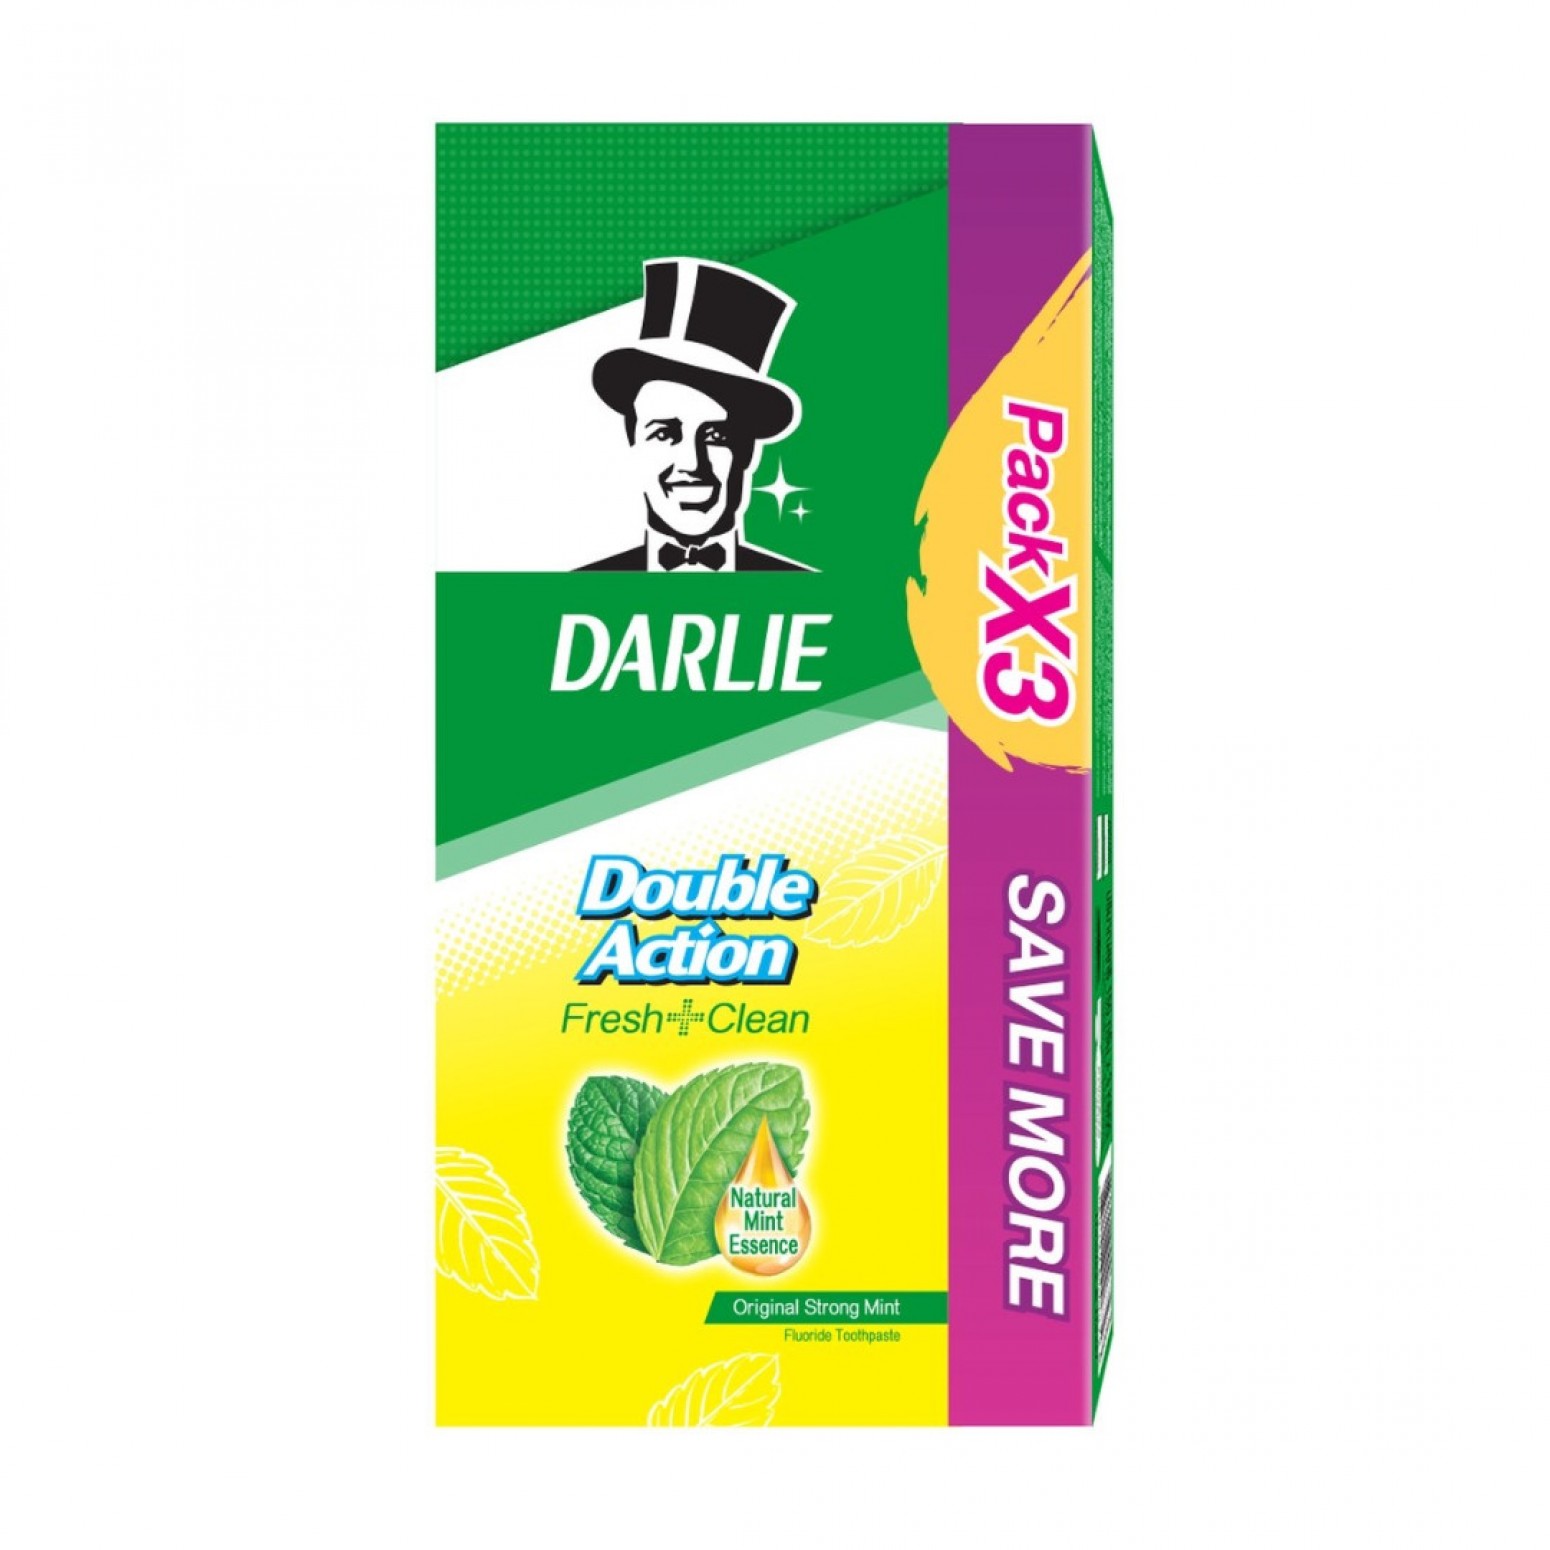 Darlie Double Action Toothpaste 150g. Pack 3